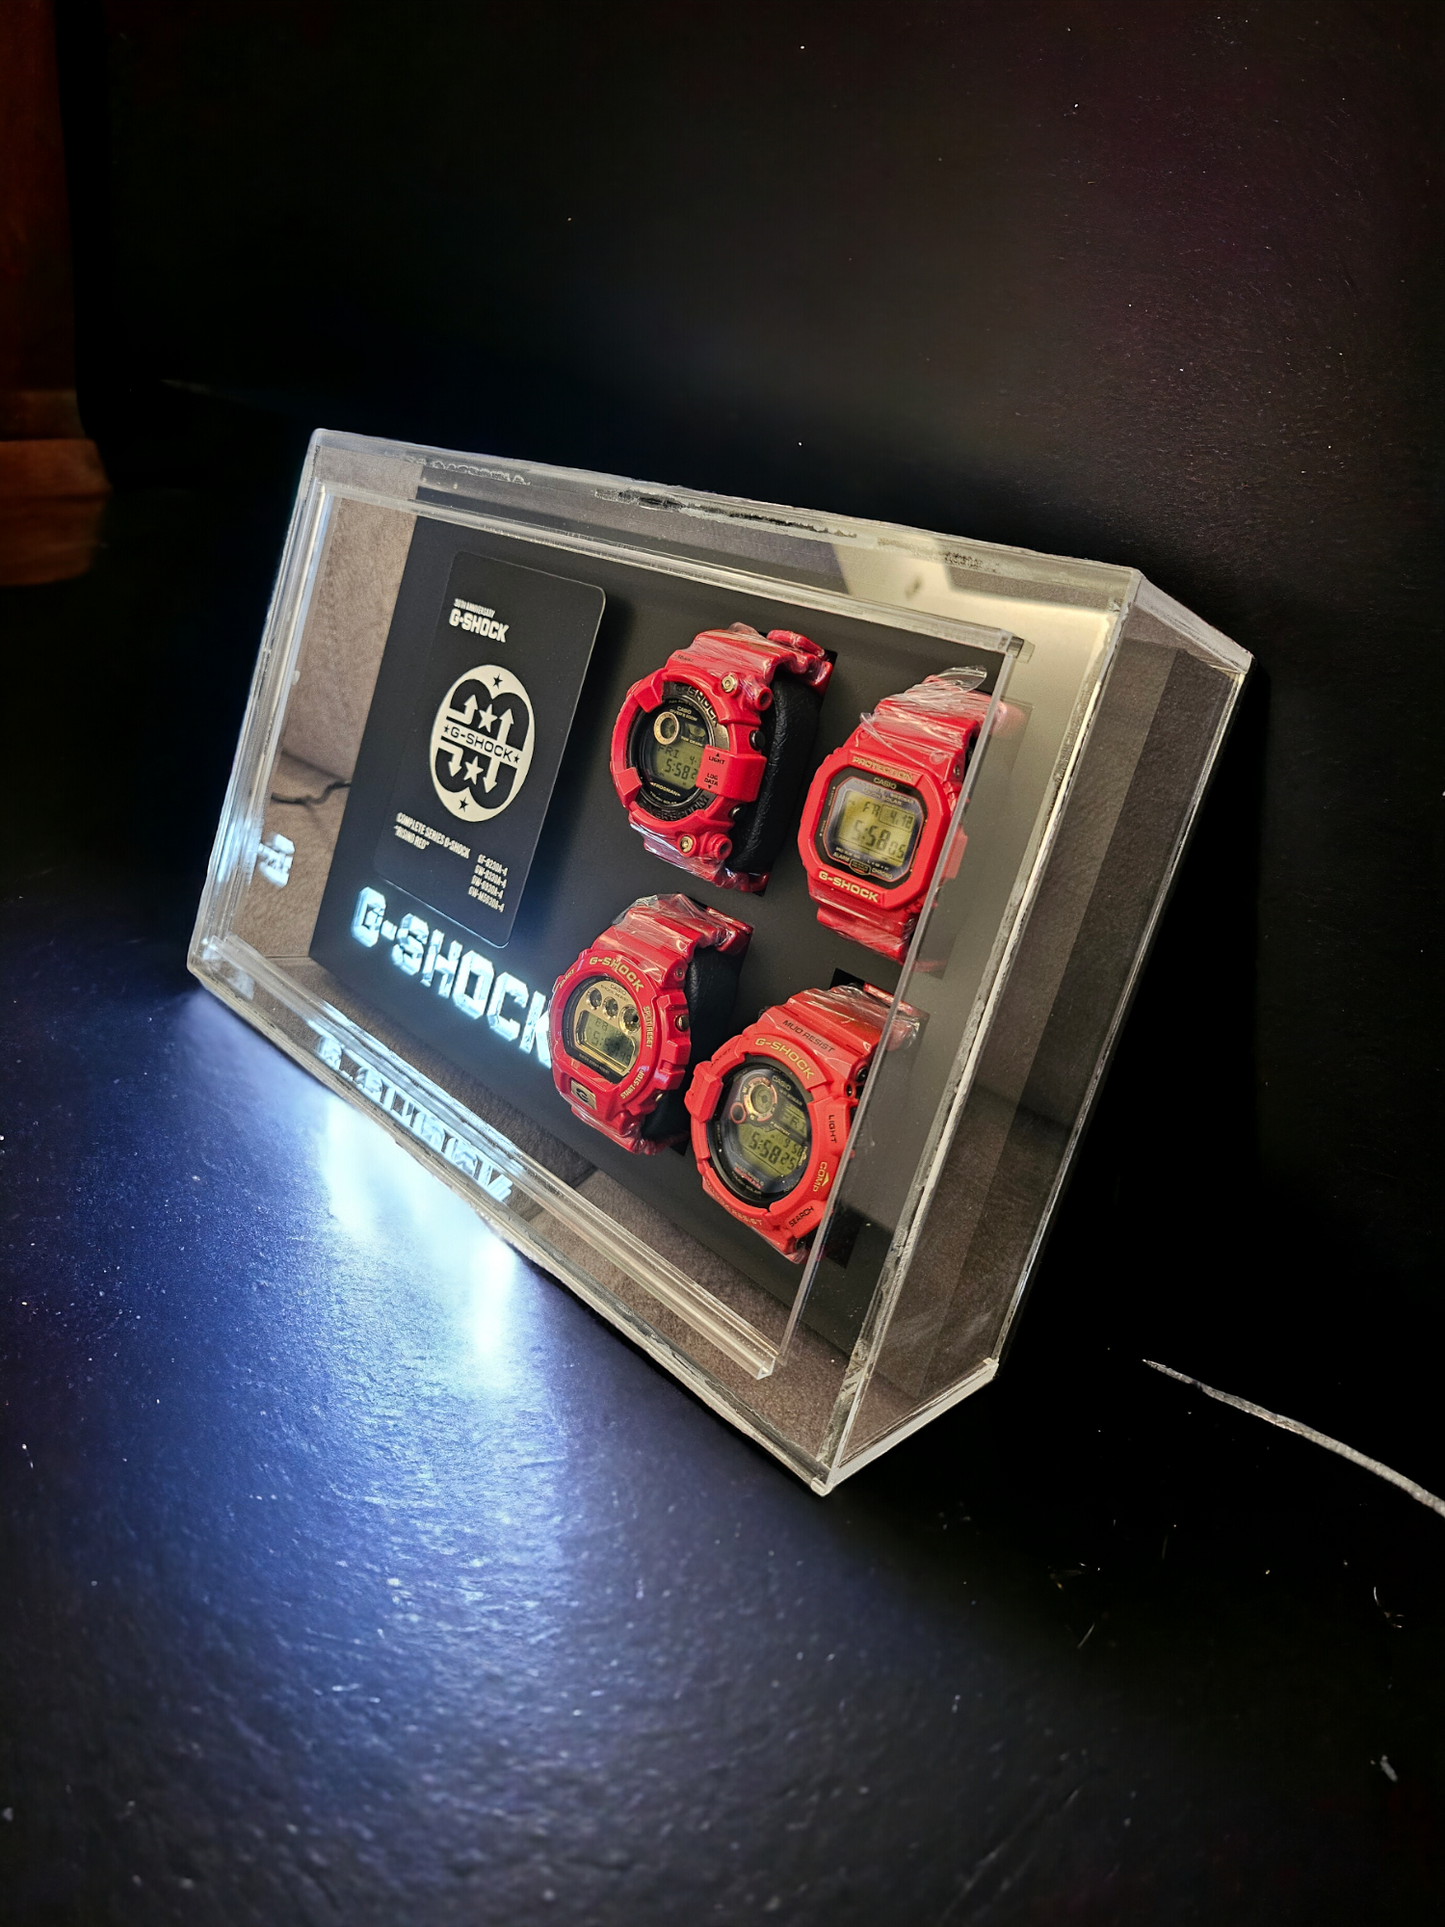 Complete Collection G-Shock "30th Anniversary Rising Red" (4 Watches)